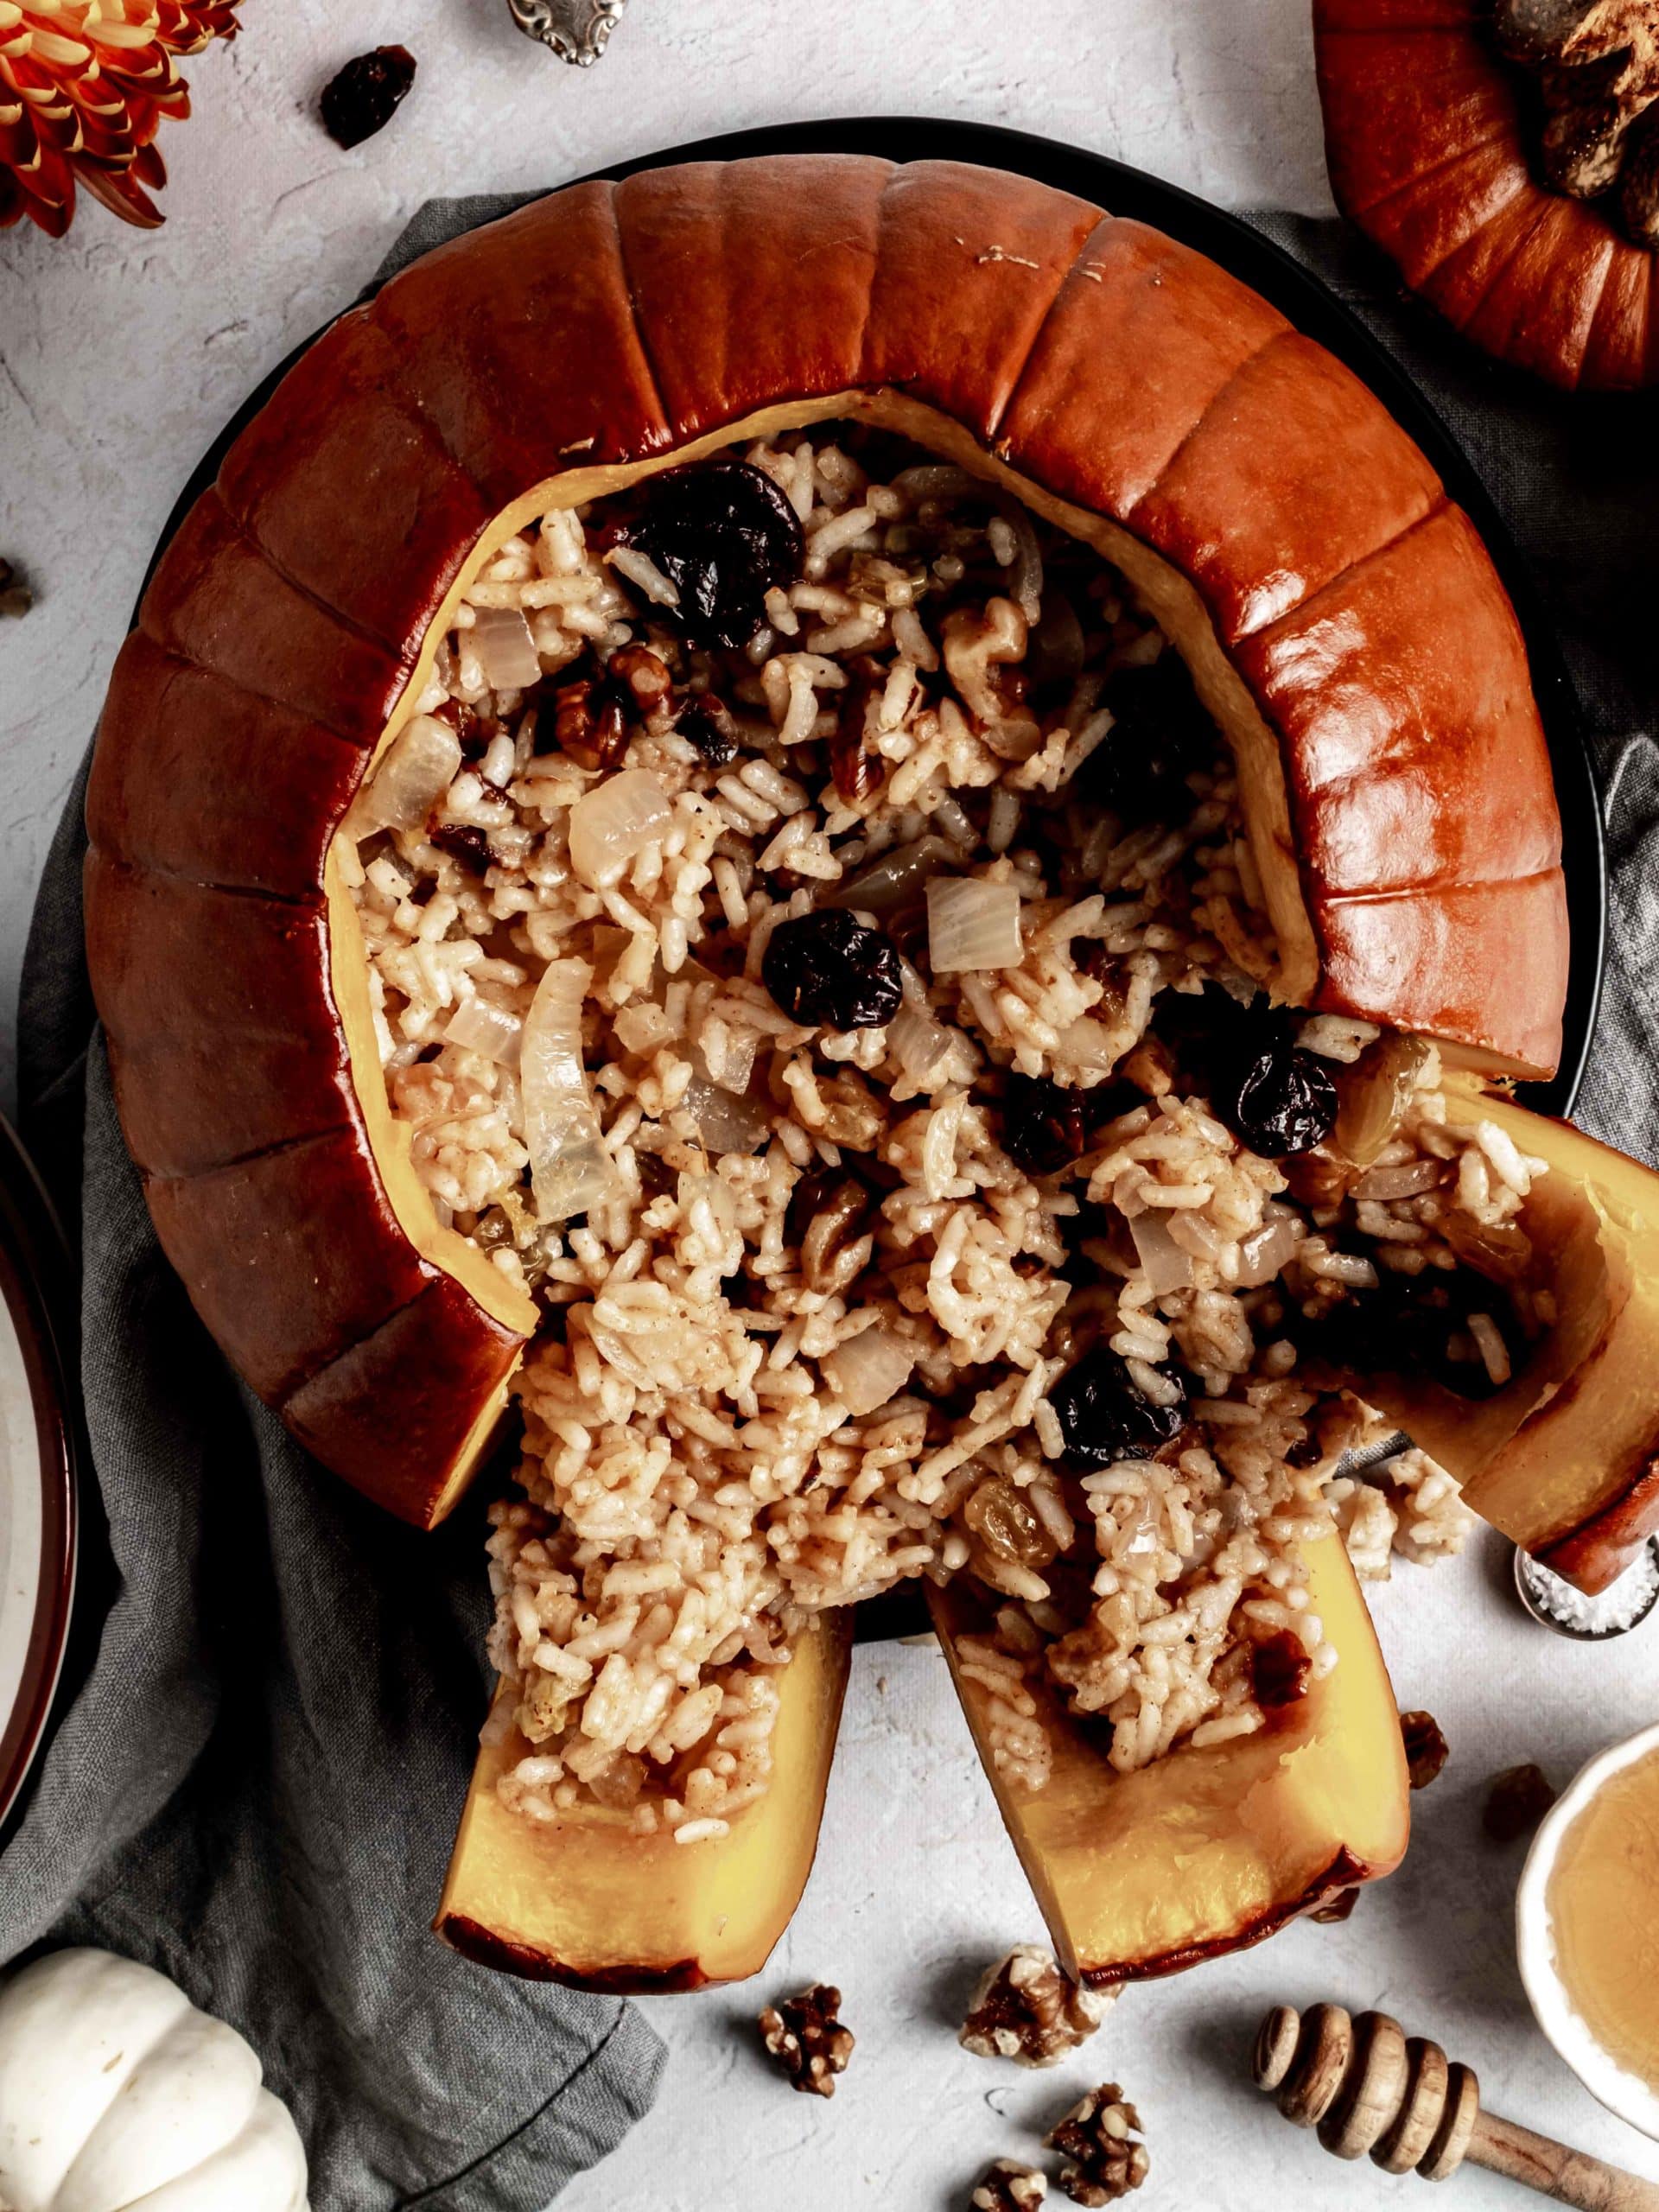 pumpkin stuffed with rice, dried fruit and nuts